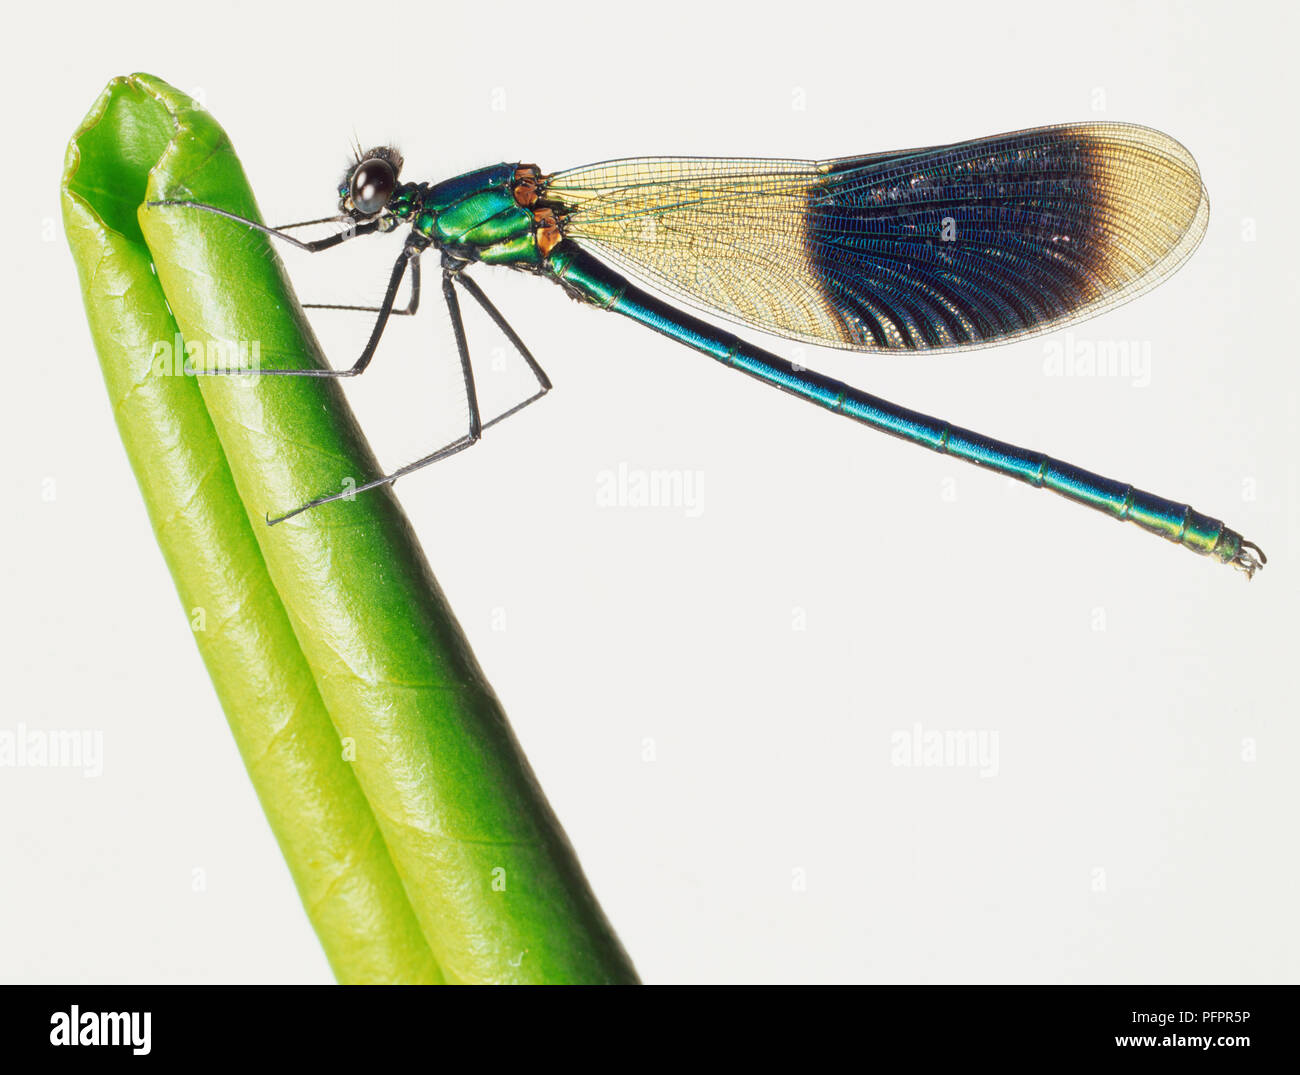 Banded Demoiselle, Calopteryx splendens, a Damselfly with a long narrow body and a black spot on its wings clings to a green plant with its bent legs. Stock Photo